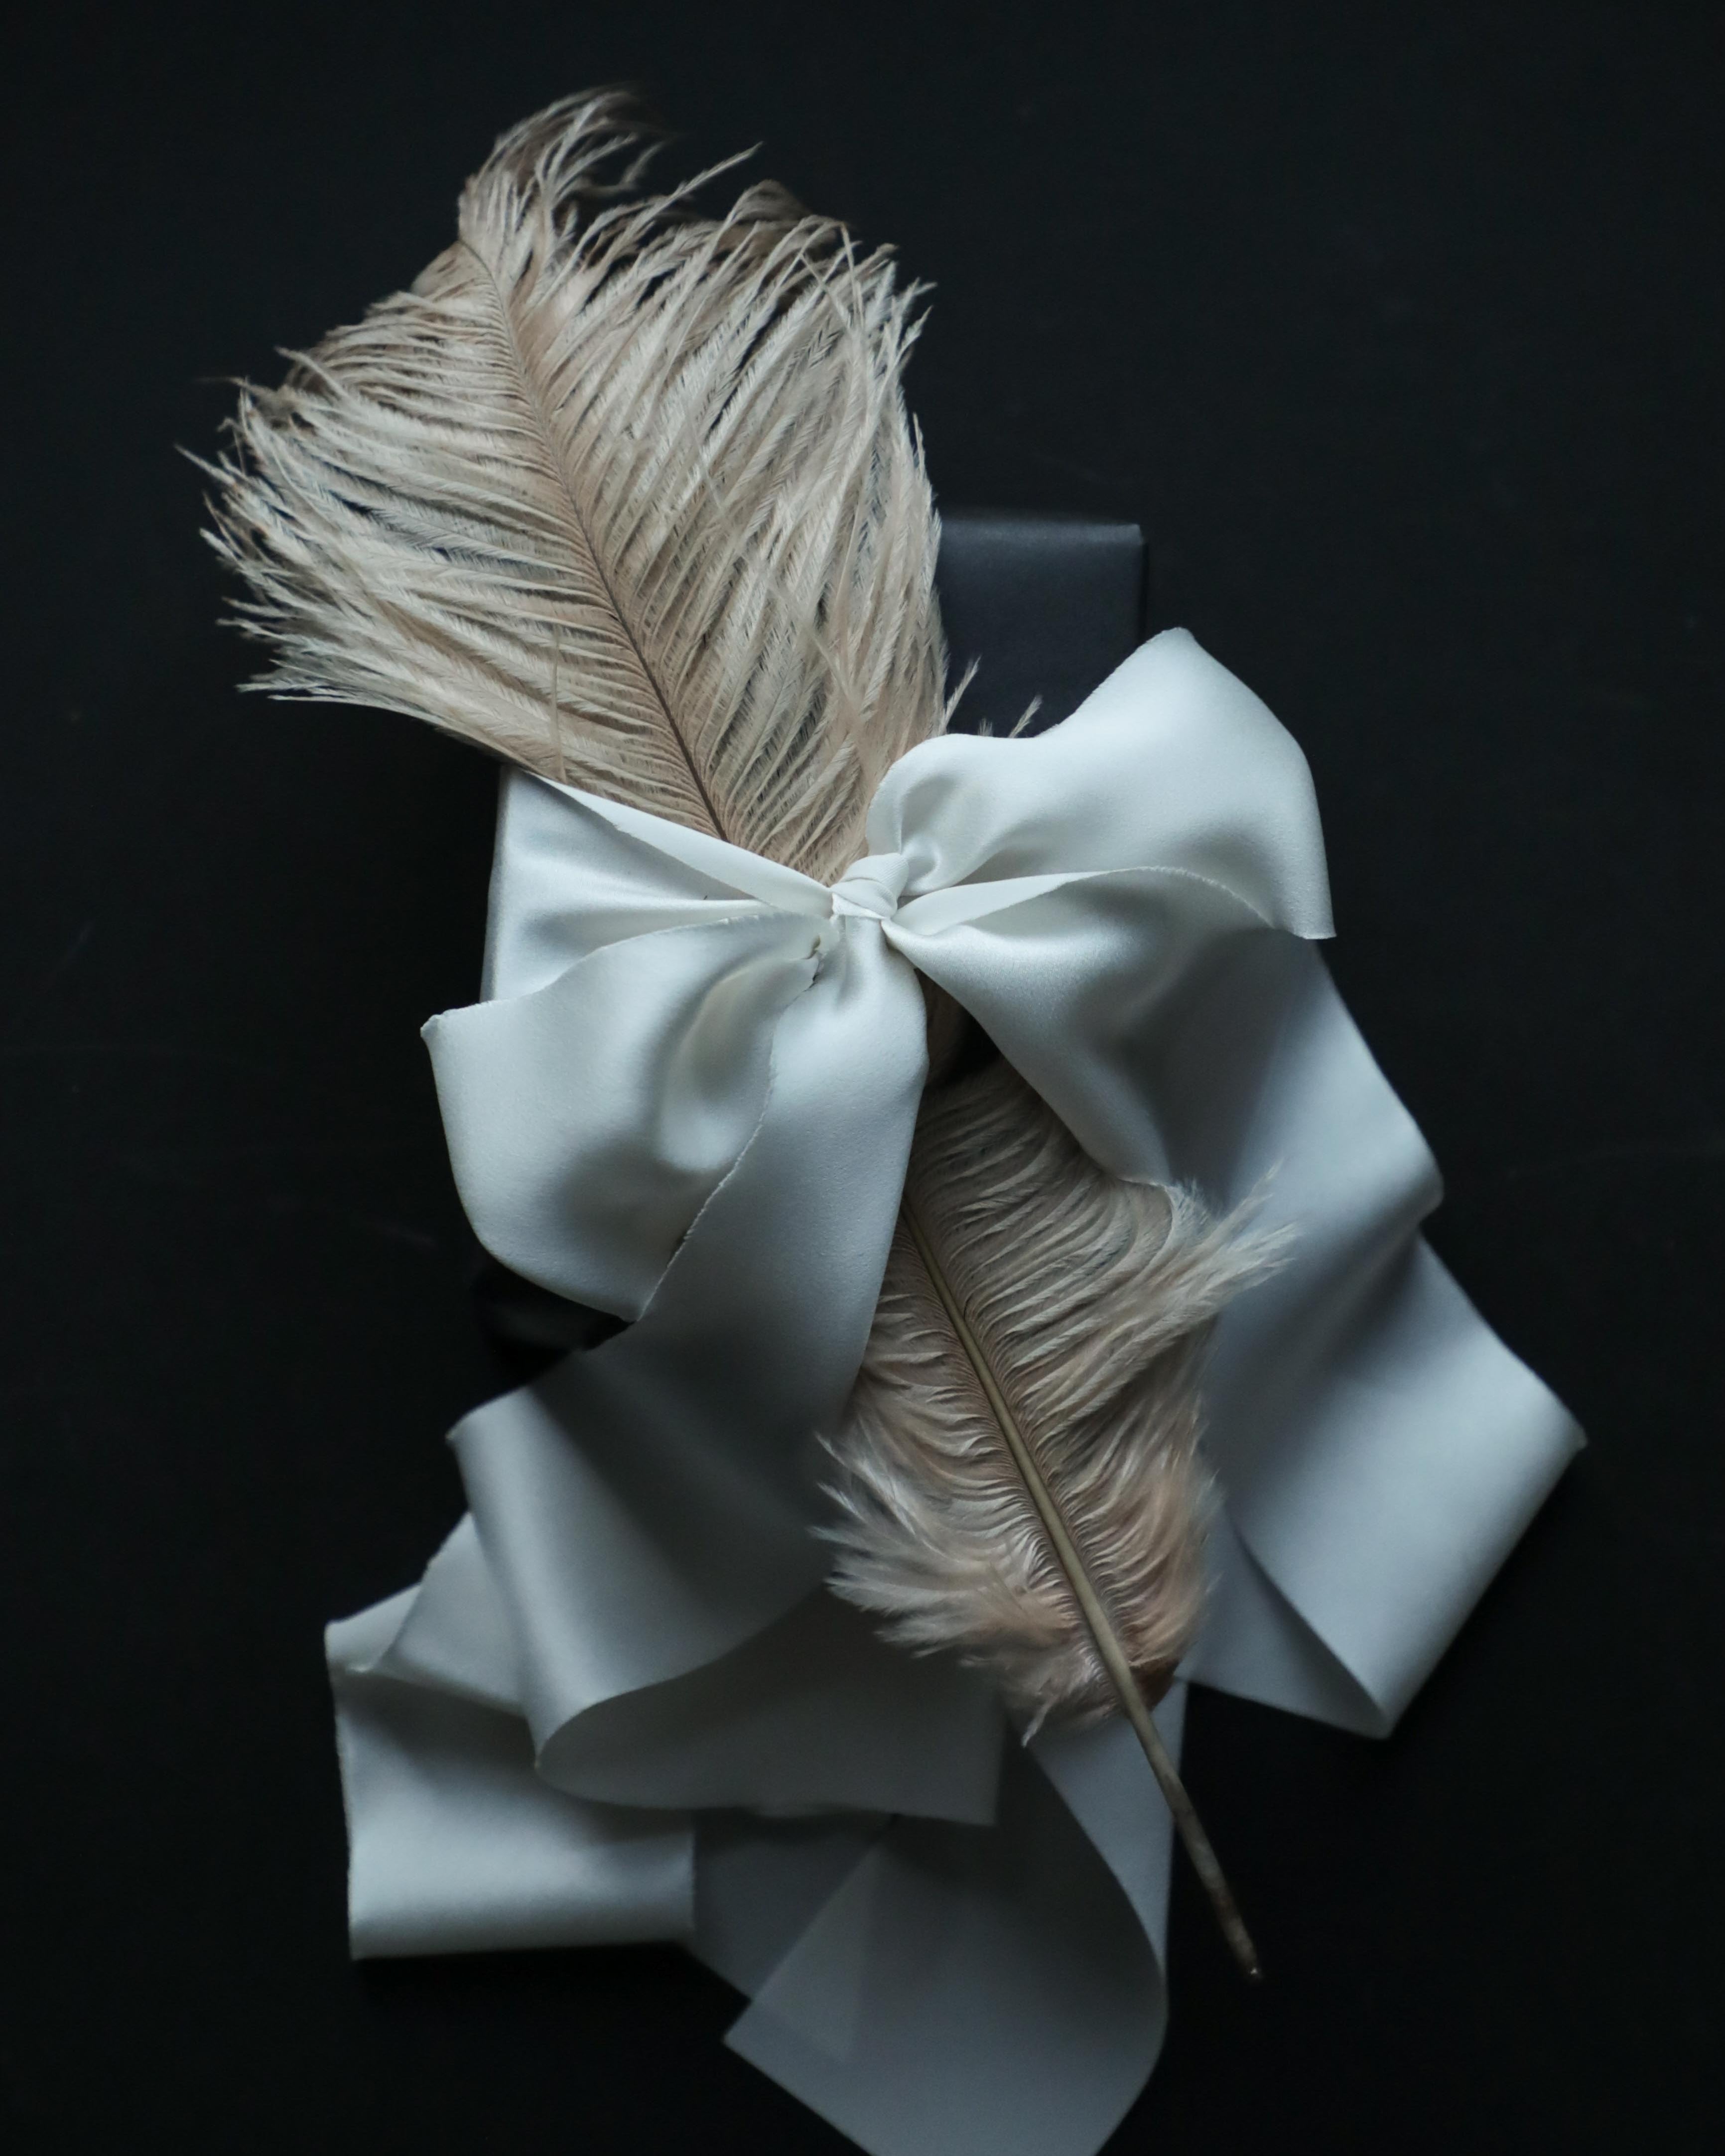 Antique White satin silk ribbon with a feather. Gift wrapping inspiration